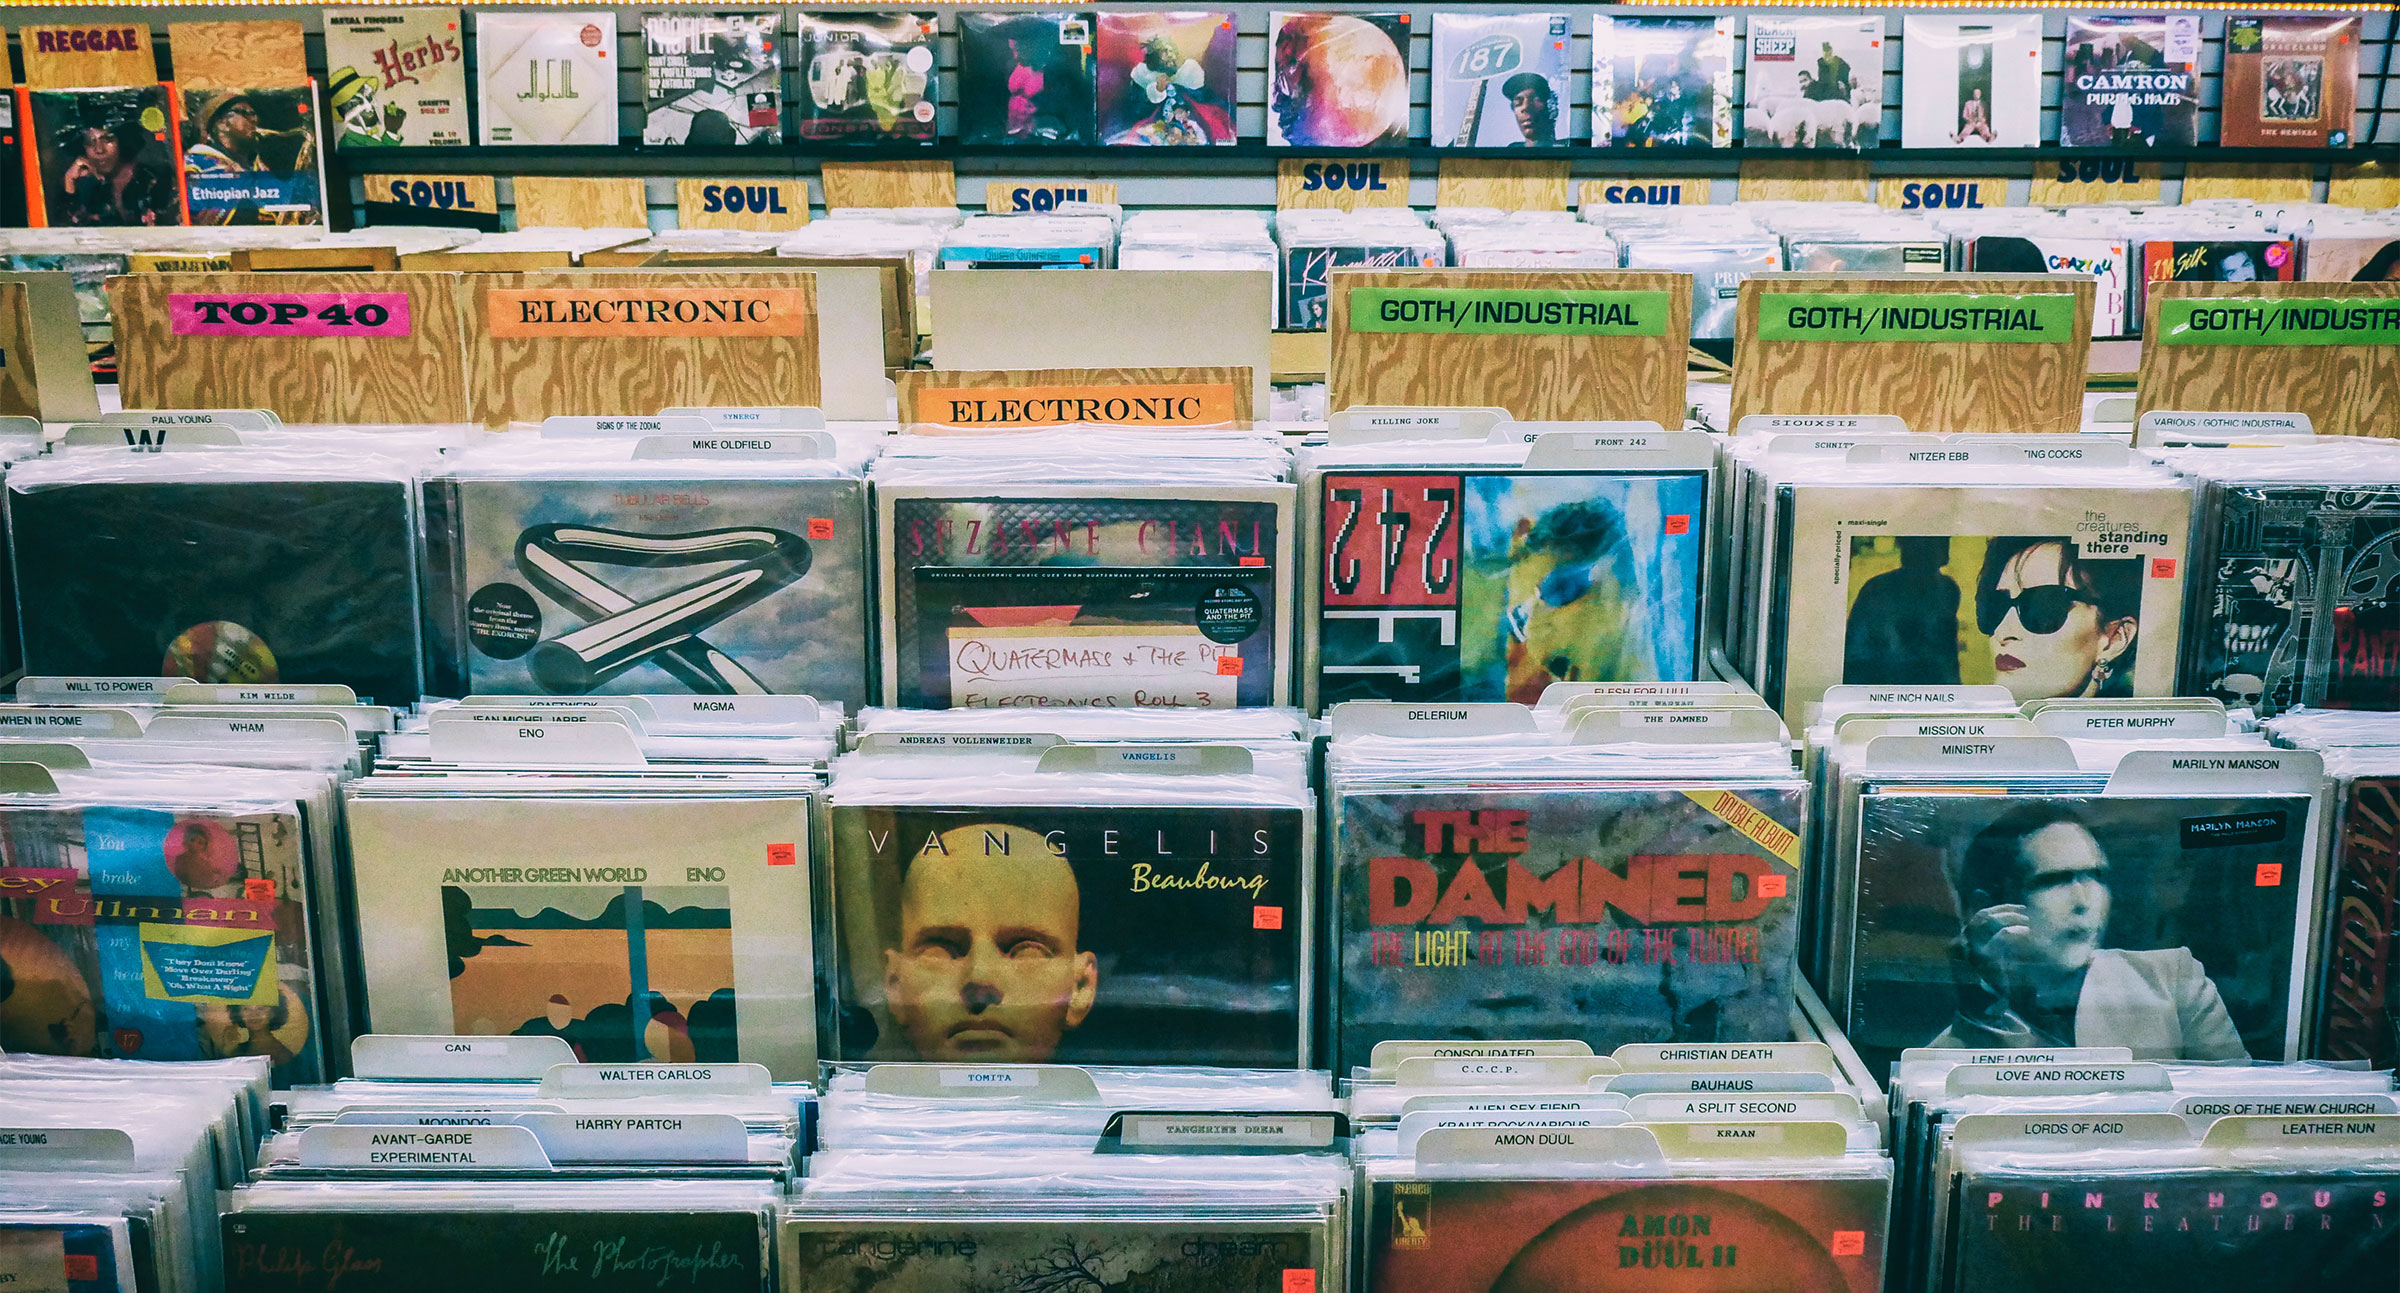 A still shot of a selection of records in a store